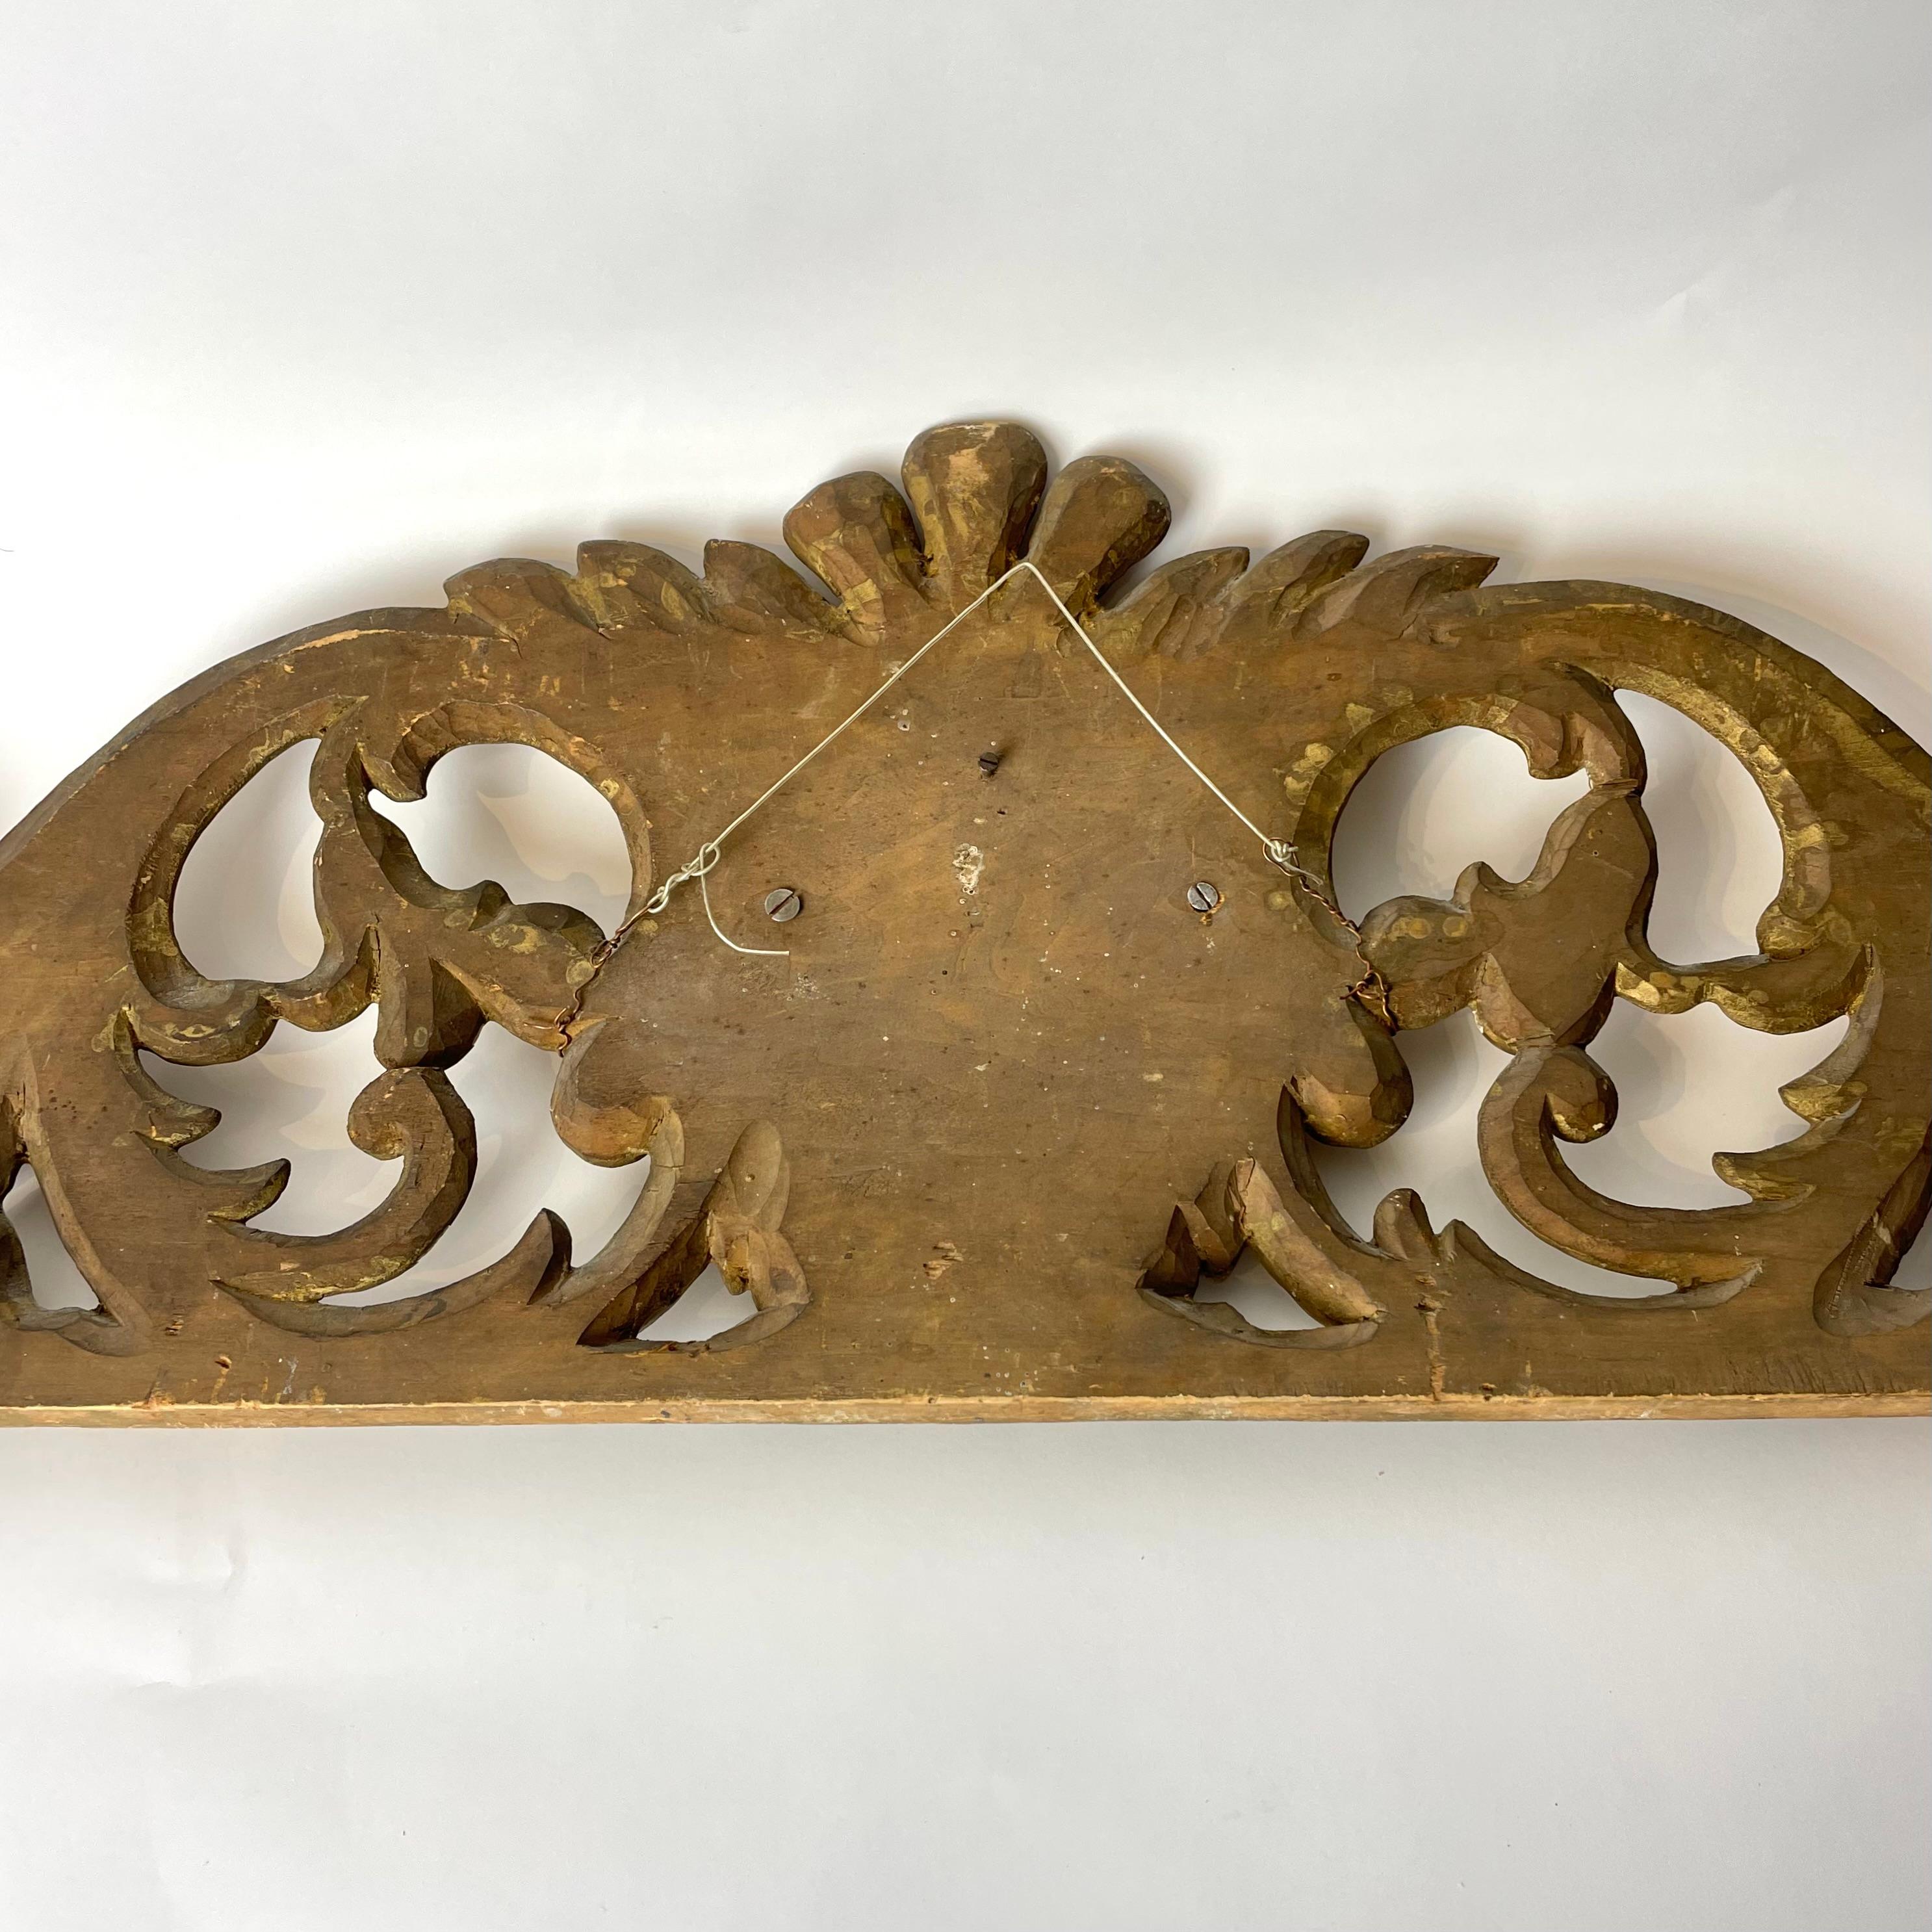 Decorative Door Moulding Architrave Gilt and Silvered Wood Panel, 18th Century For Sale 4